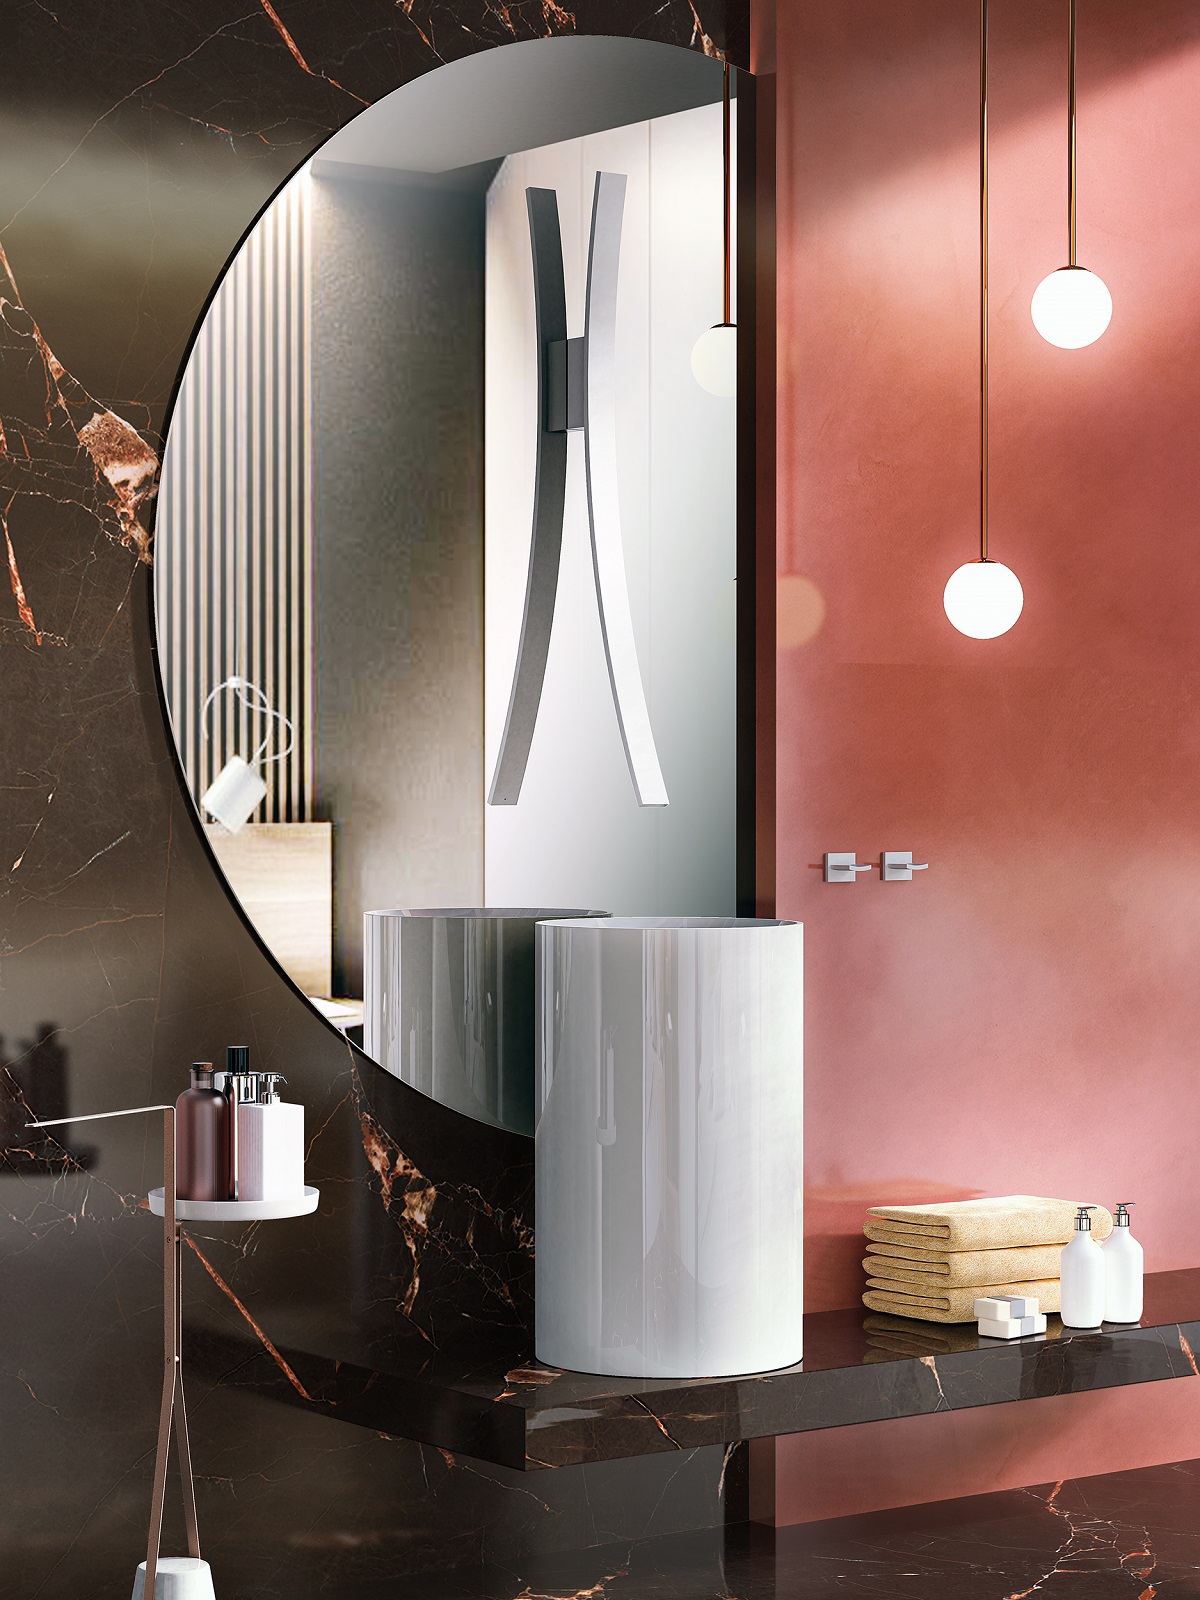 curved half moon bathroom mirror over cylindrical handbasin from the Luna collection by GRAFF